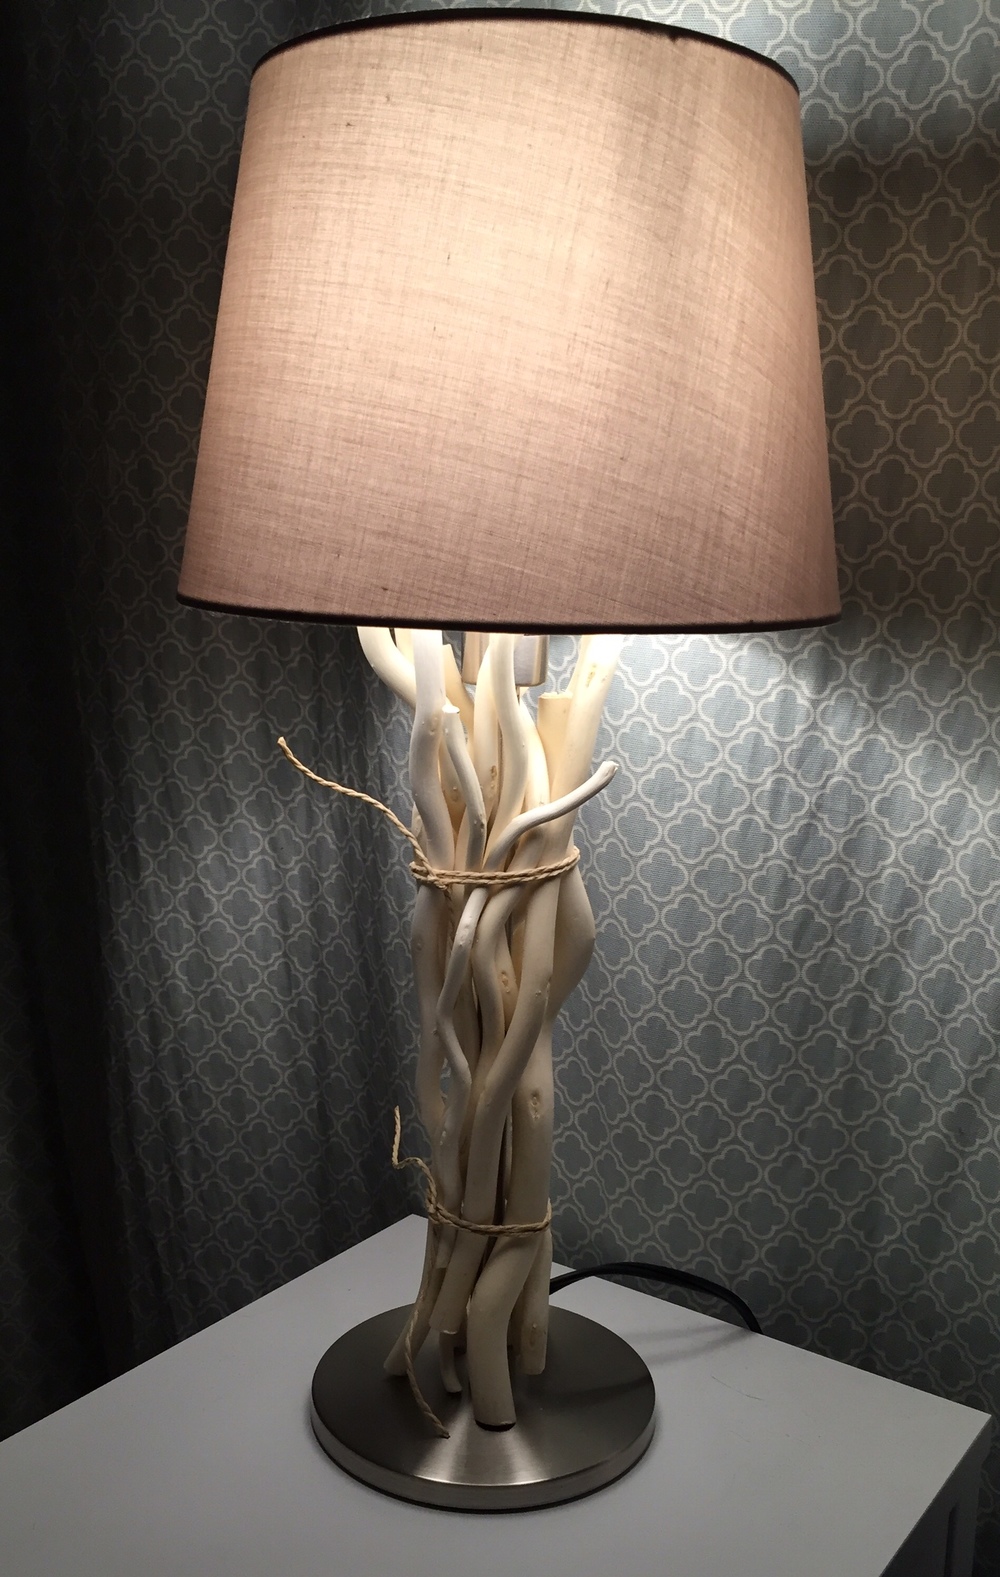 Diy Driftwood Lamps Ikea, How To Make A Driftwood Table Lamp